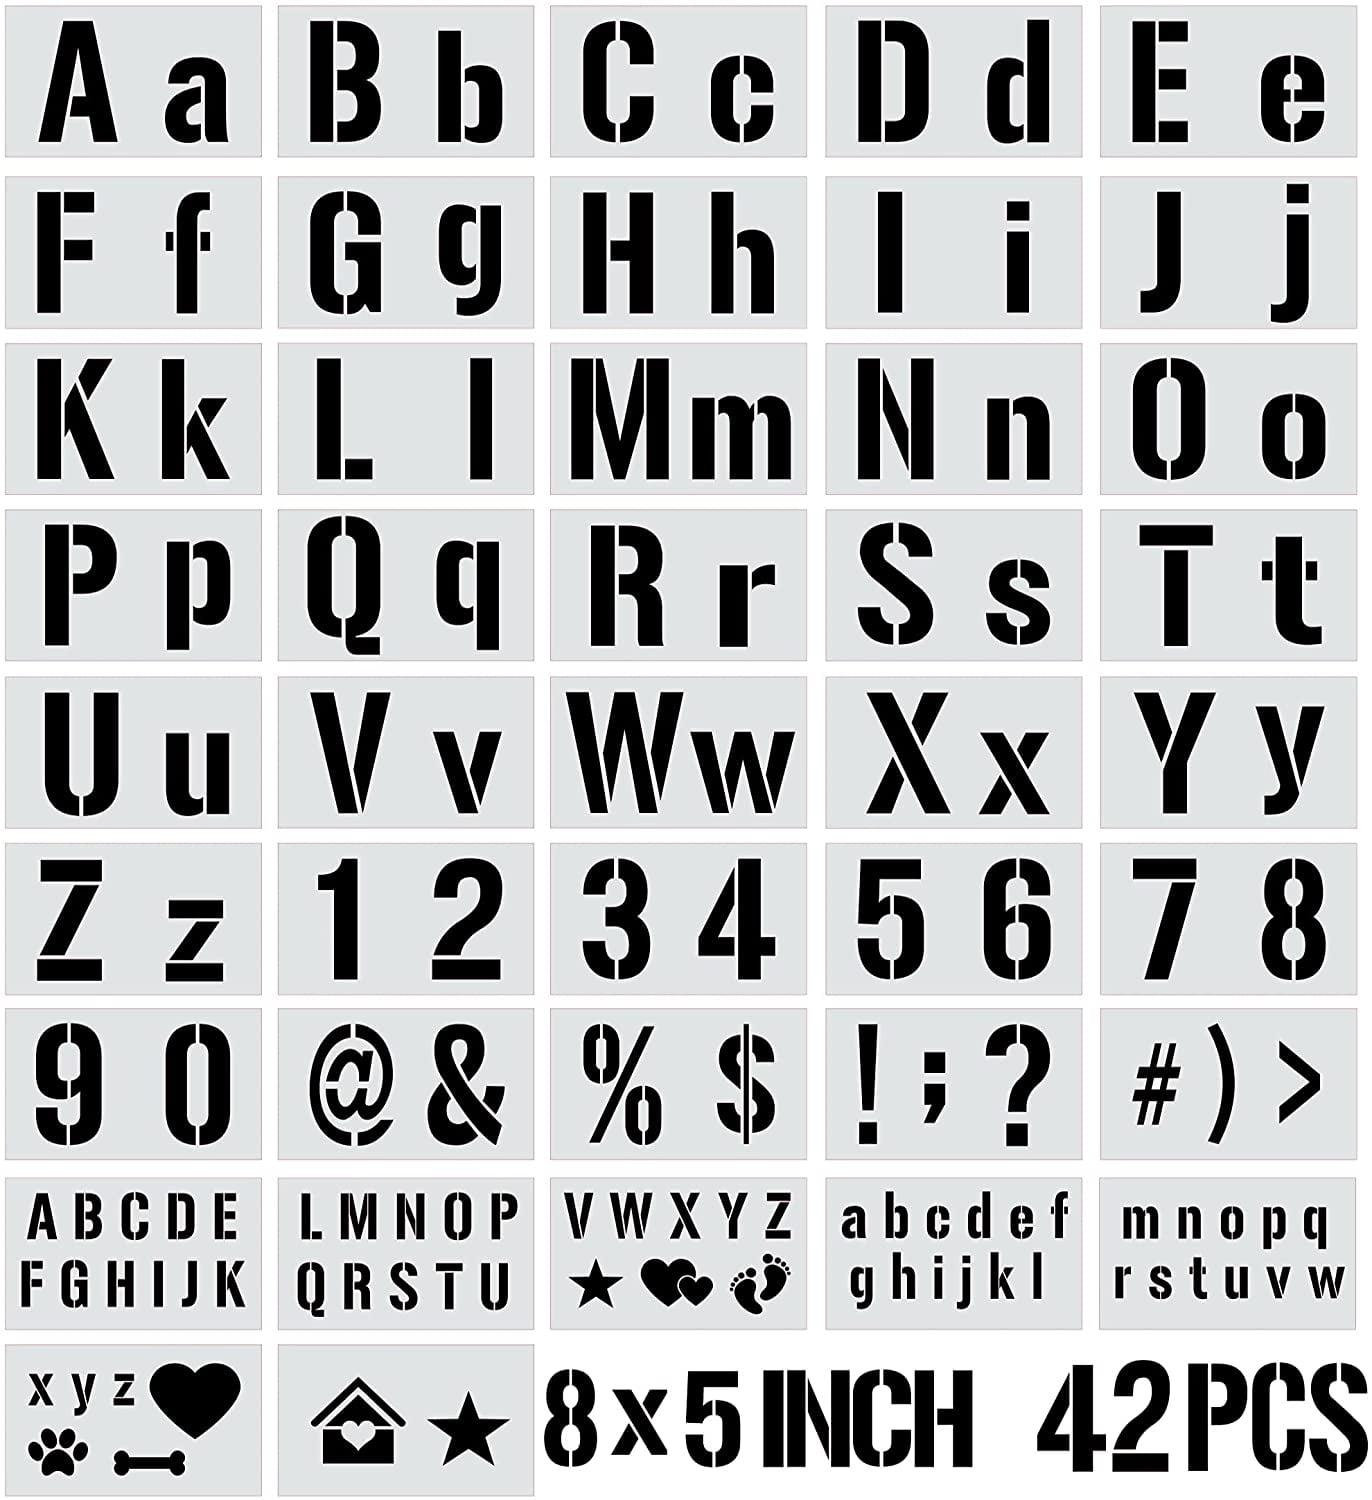 Printable Stencils (Free Alphabet Font and Letter Templates) – DIY  Projects, Patterns, Monograms, Designs, Templates